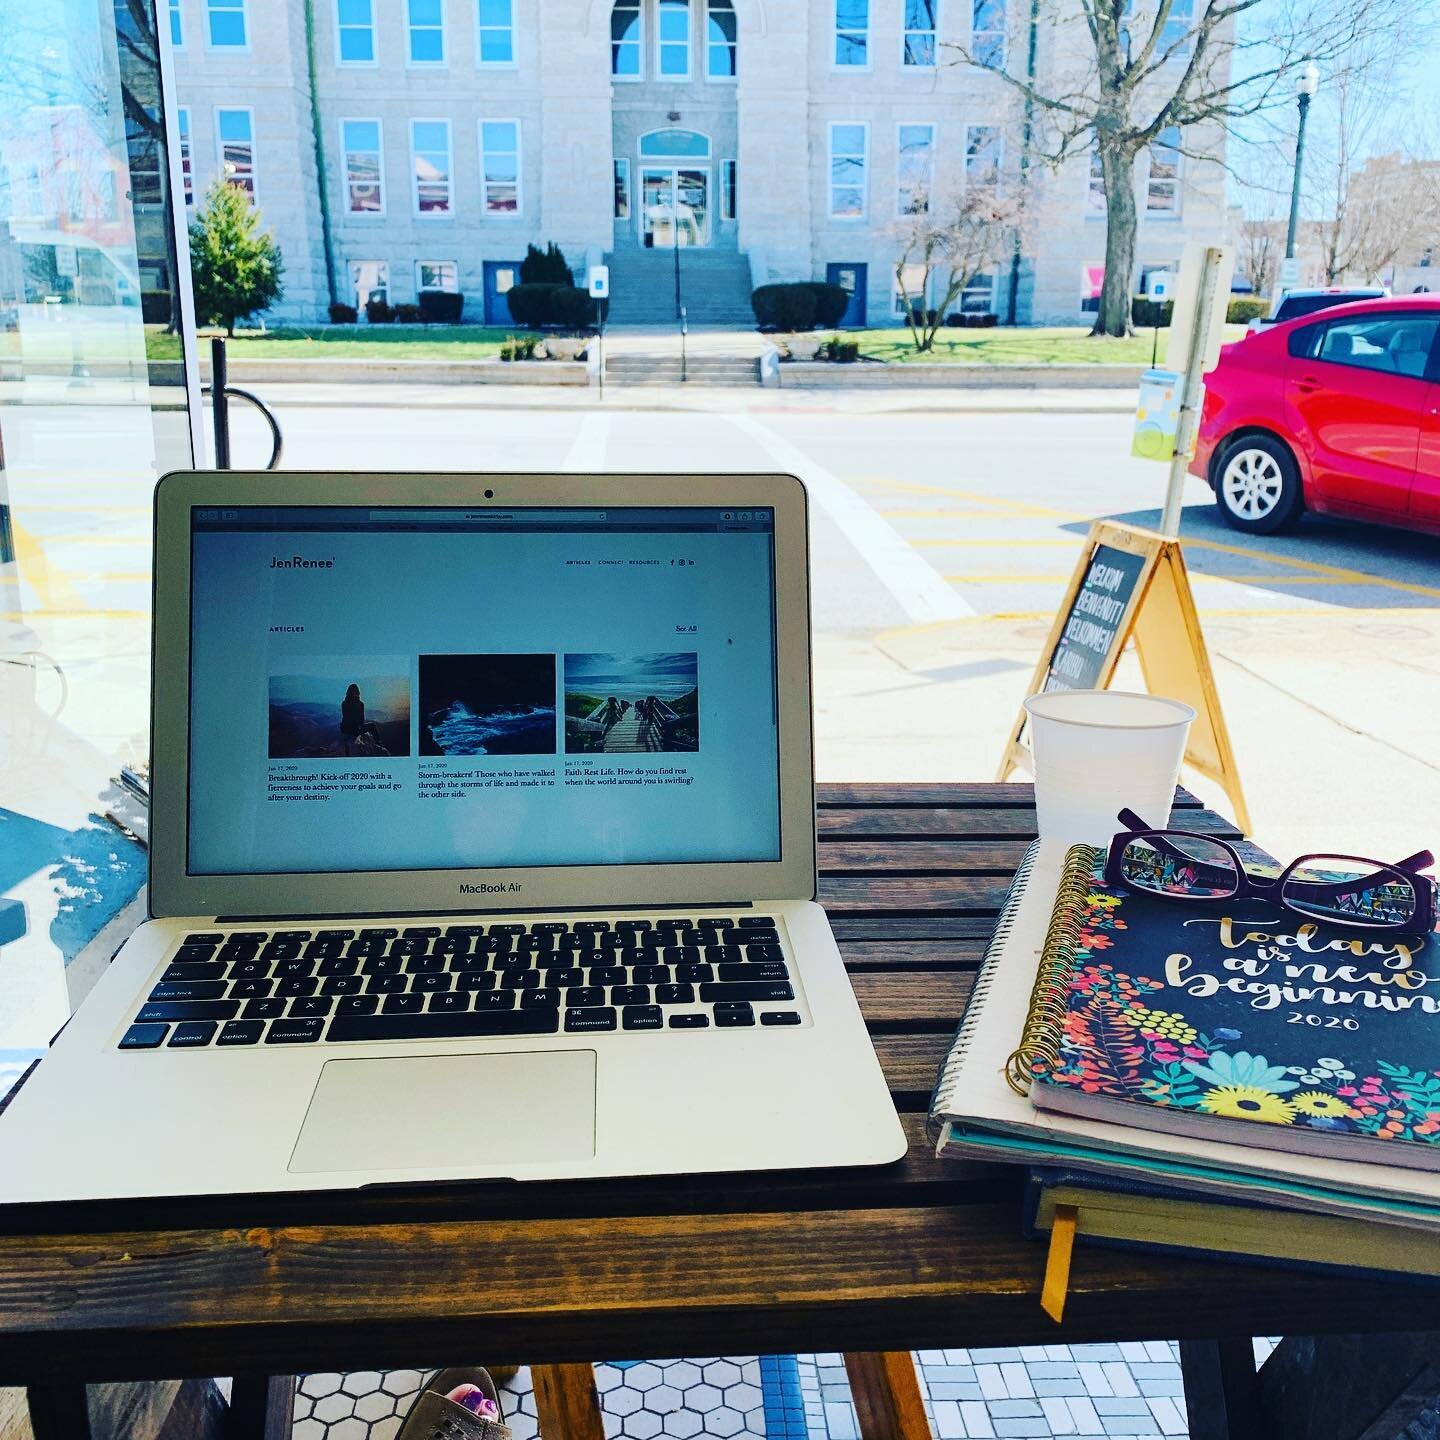 It&rsquo;s a gorgeous day!!! Getting creative in my office!! Working on a new article🤓